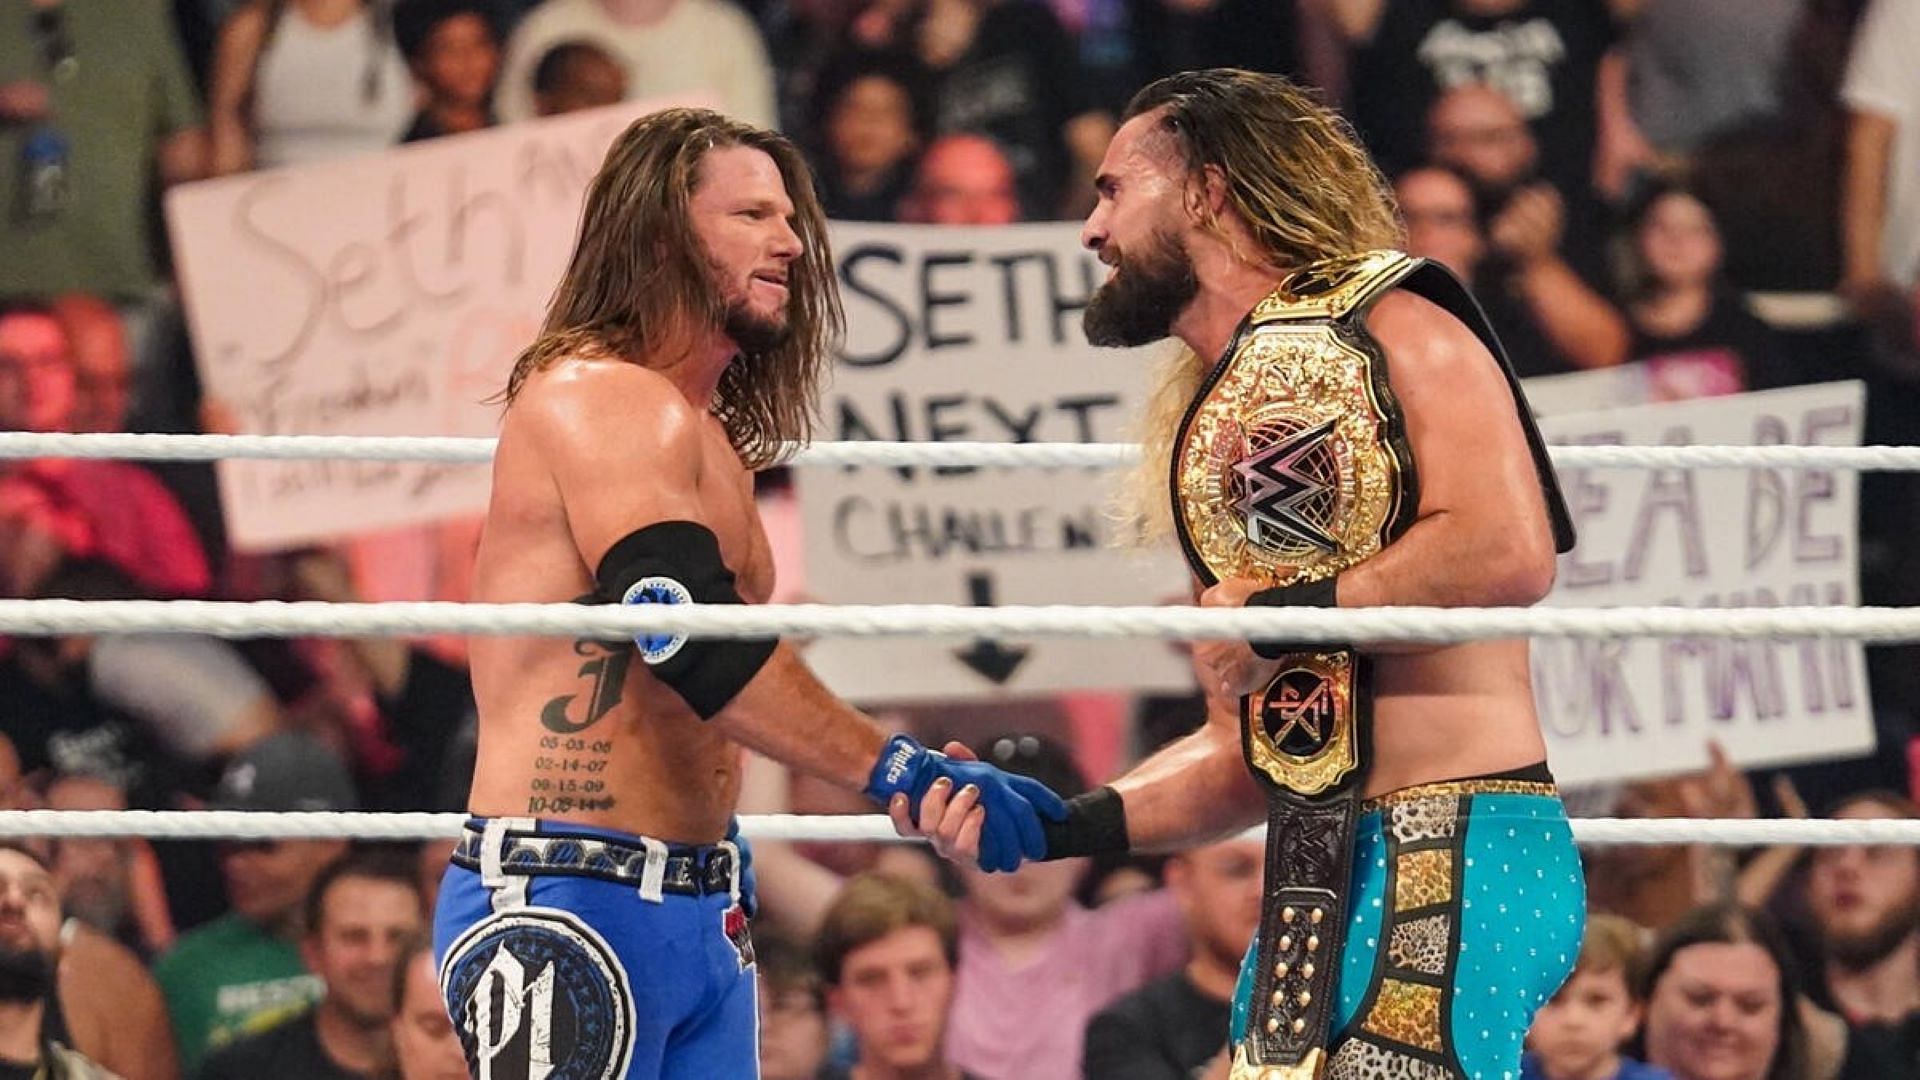 AJ Styles and Seth Rollins are two of the best wrestlers of the current generation.